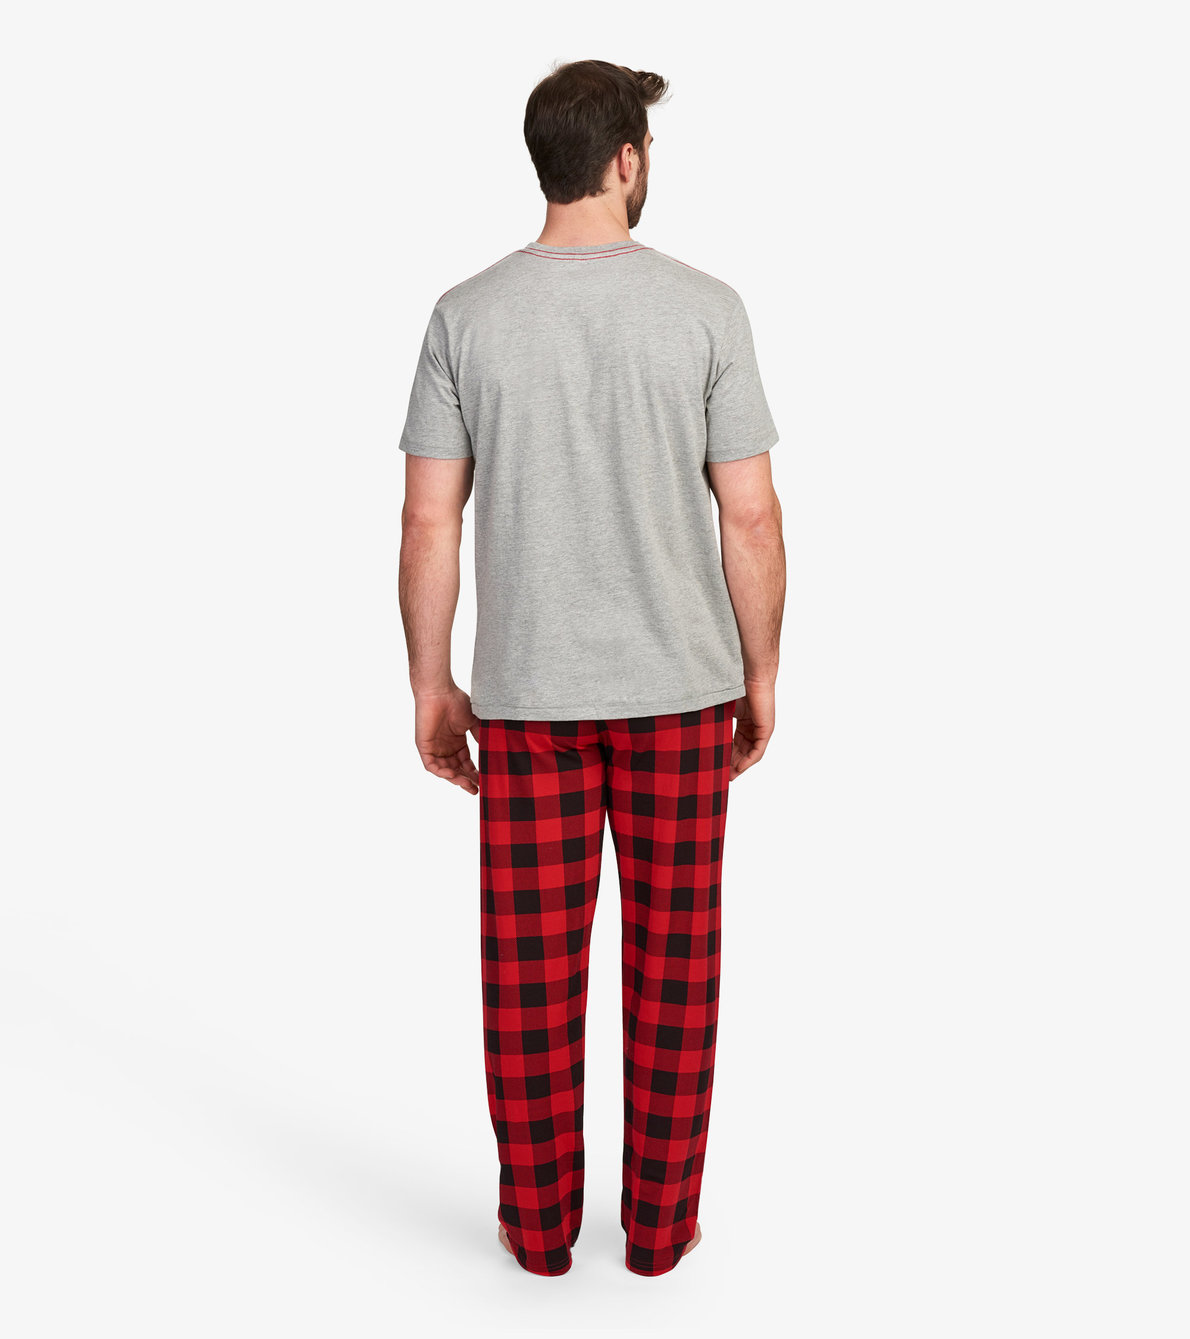 View larger image of Wild Side Men's Tee and Pants Pajama Separates